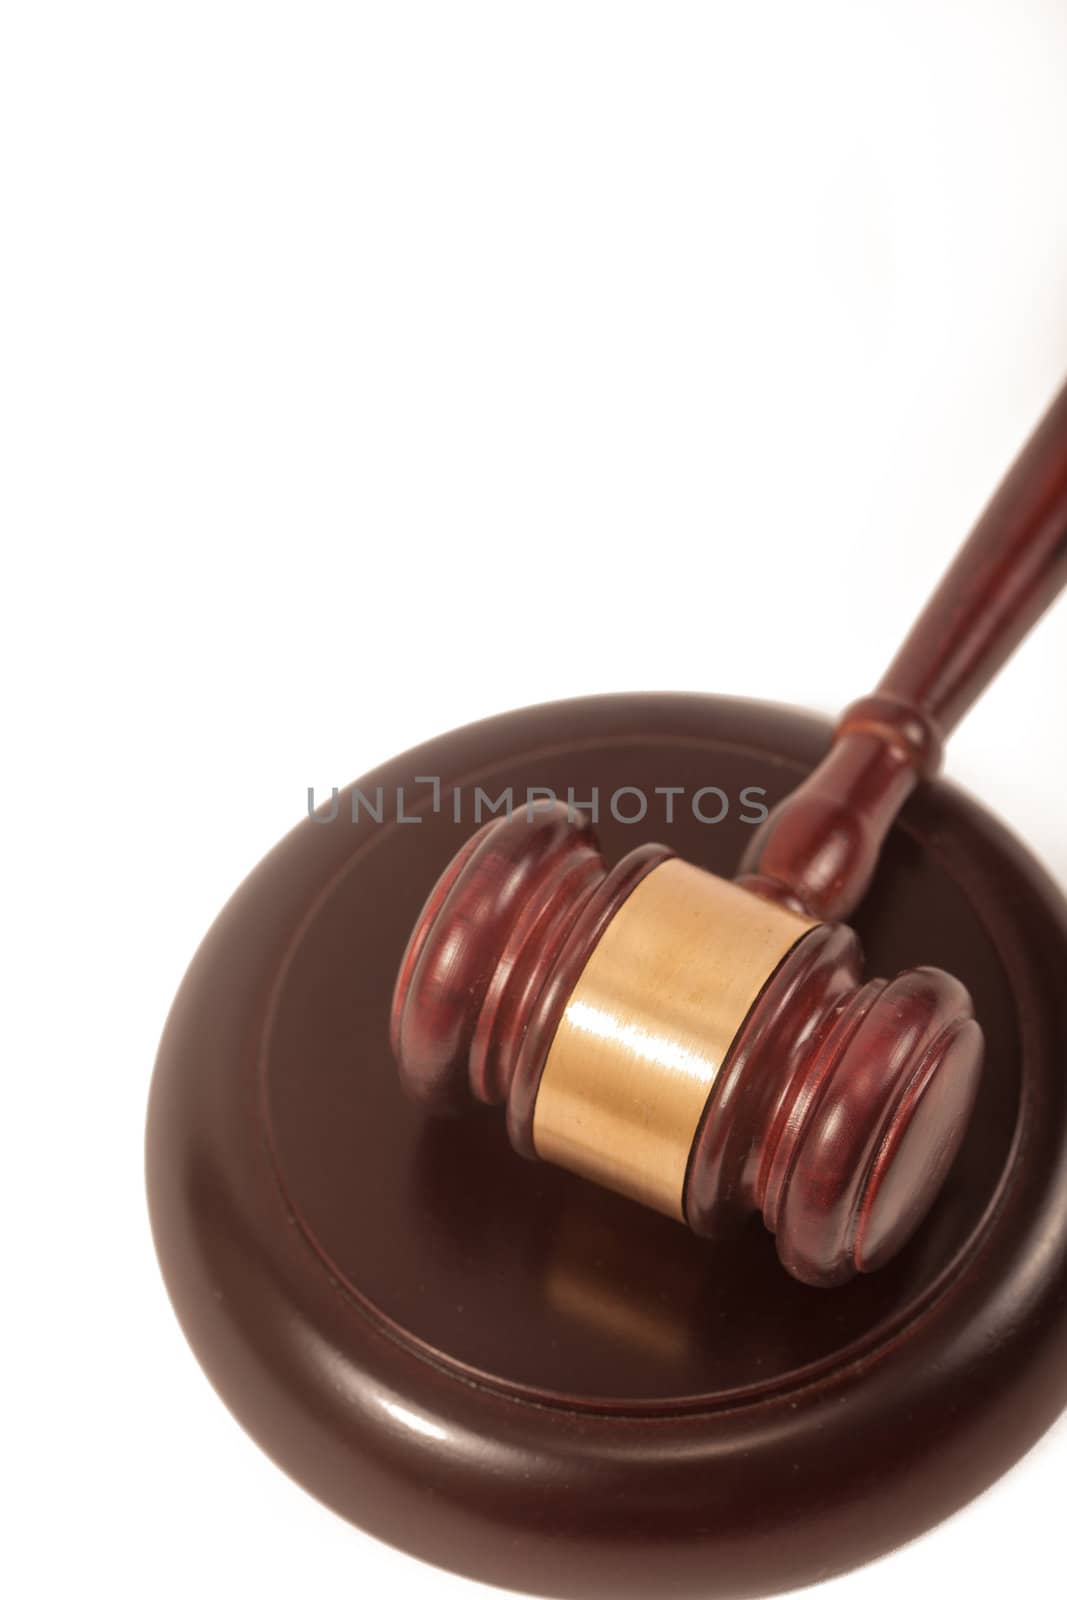 A wooden gavel and soundboard, isolated on a white background.